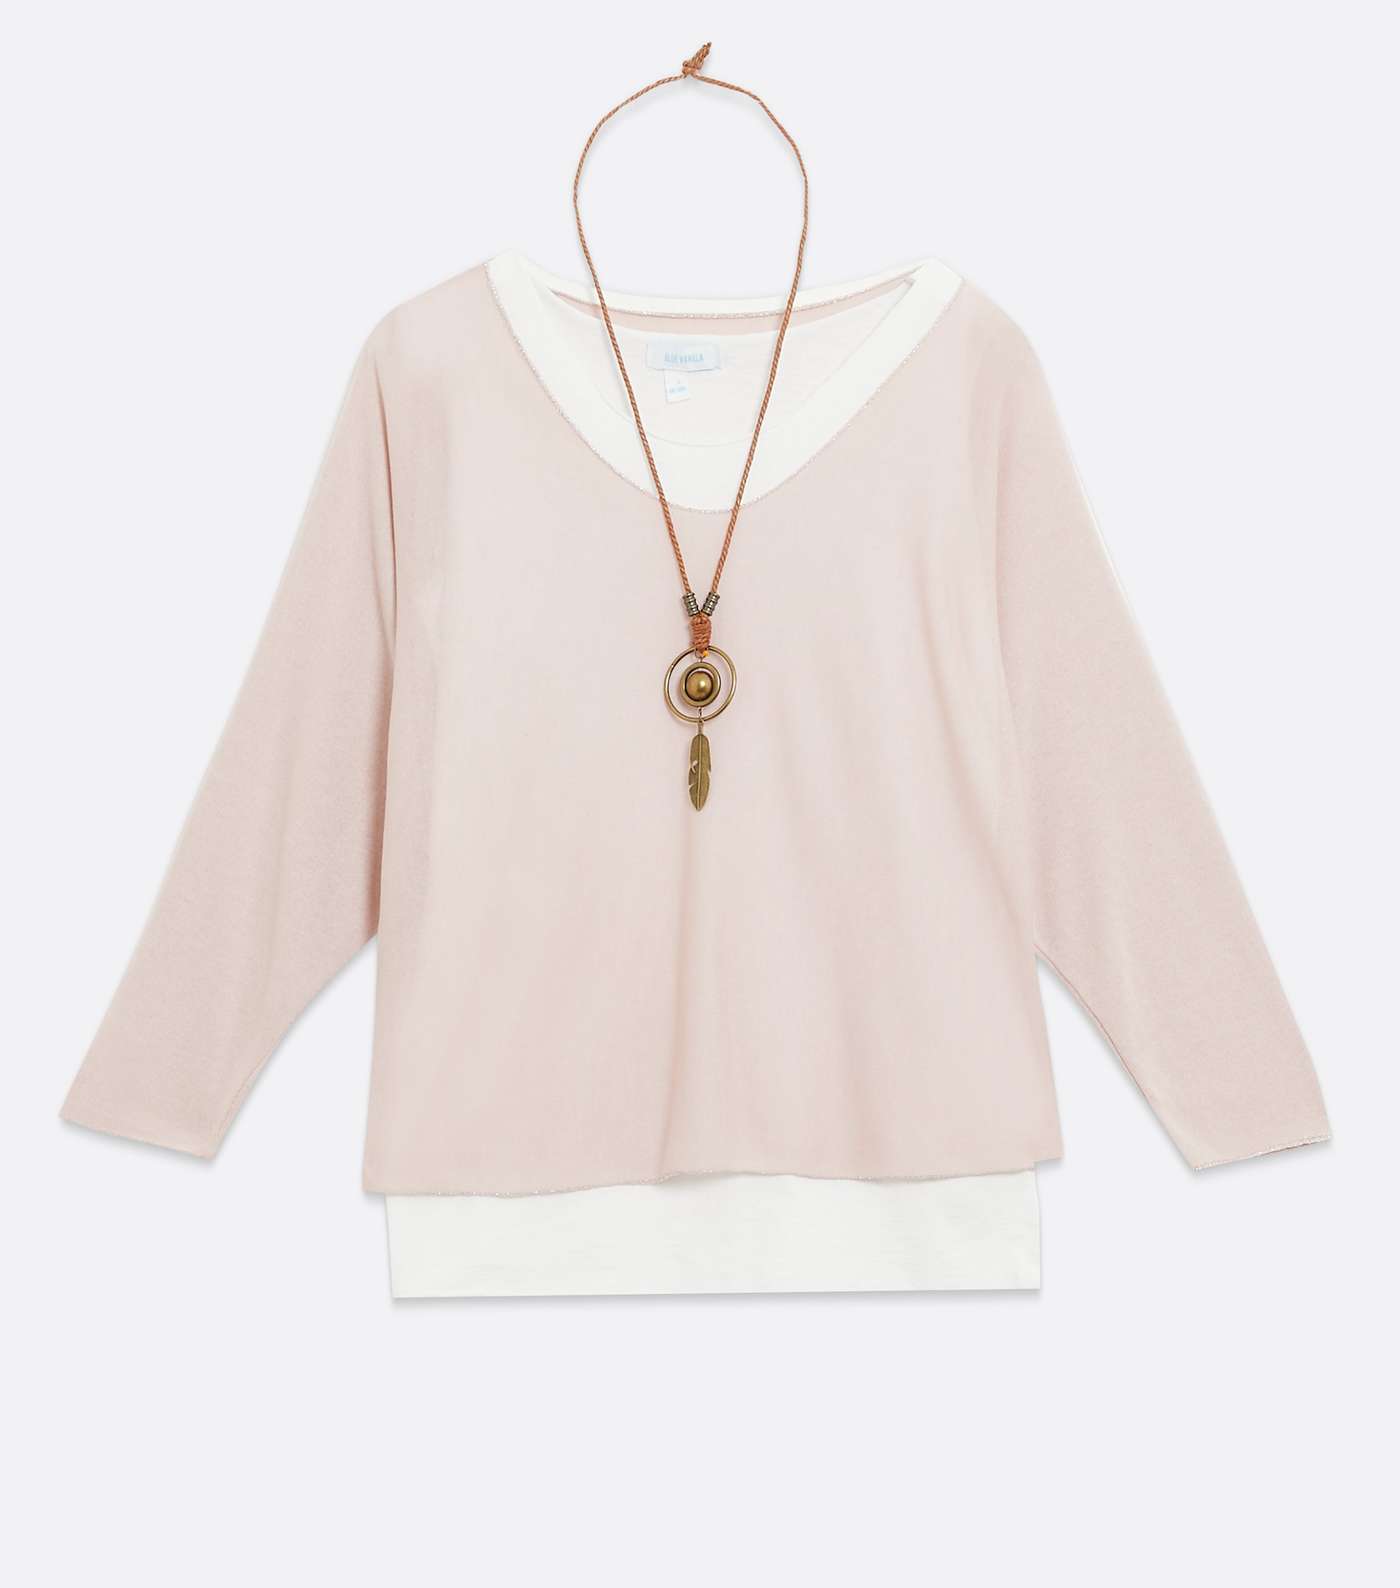 Blue Vanilla Pale Pink 3 in 1 Necklace Batwing Top Image 5